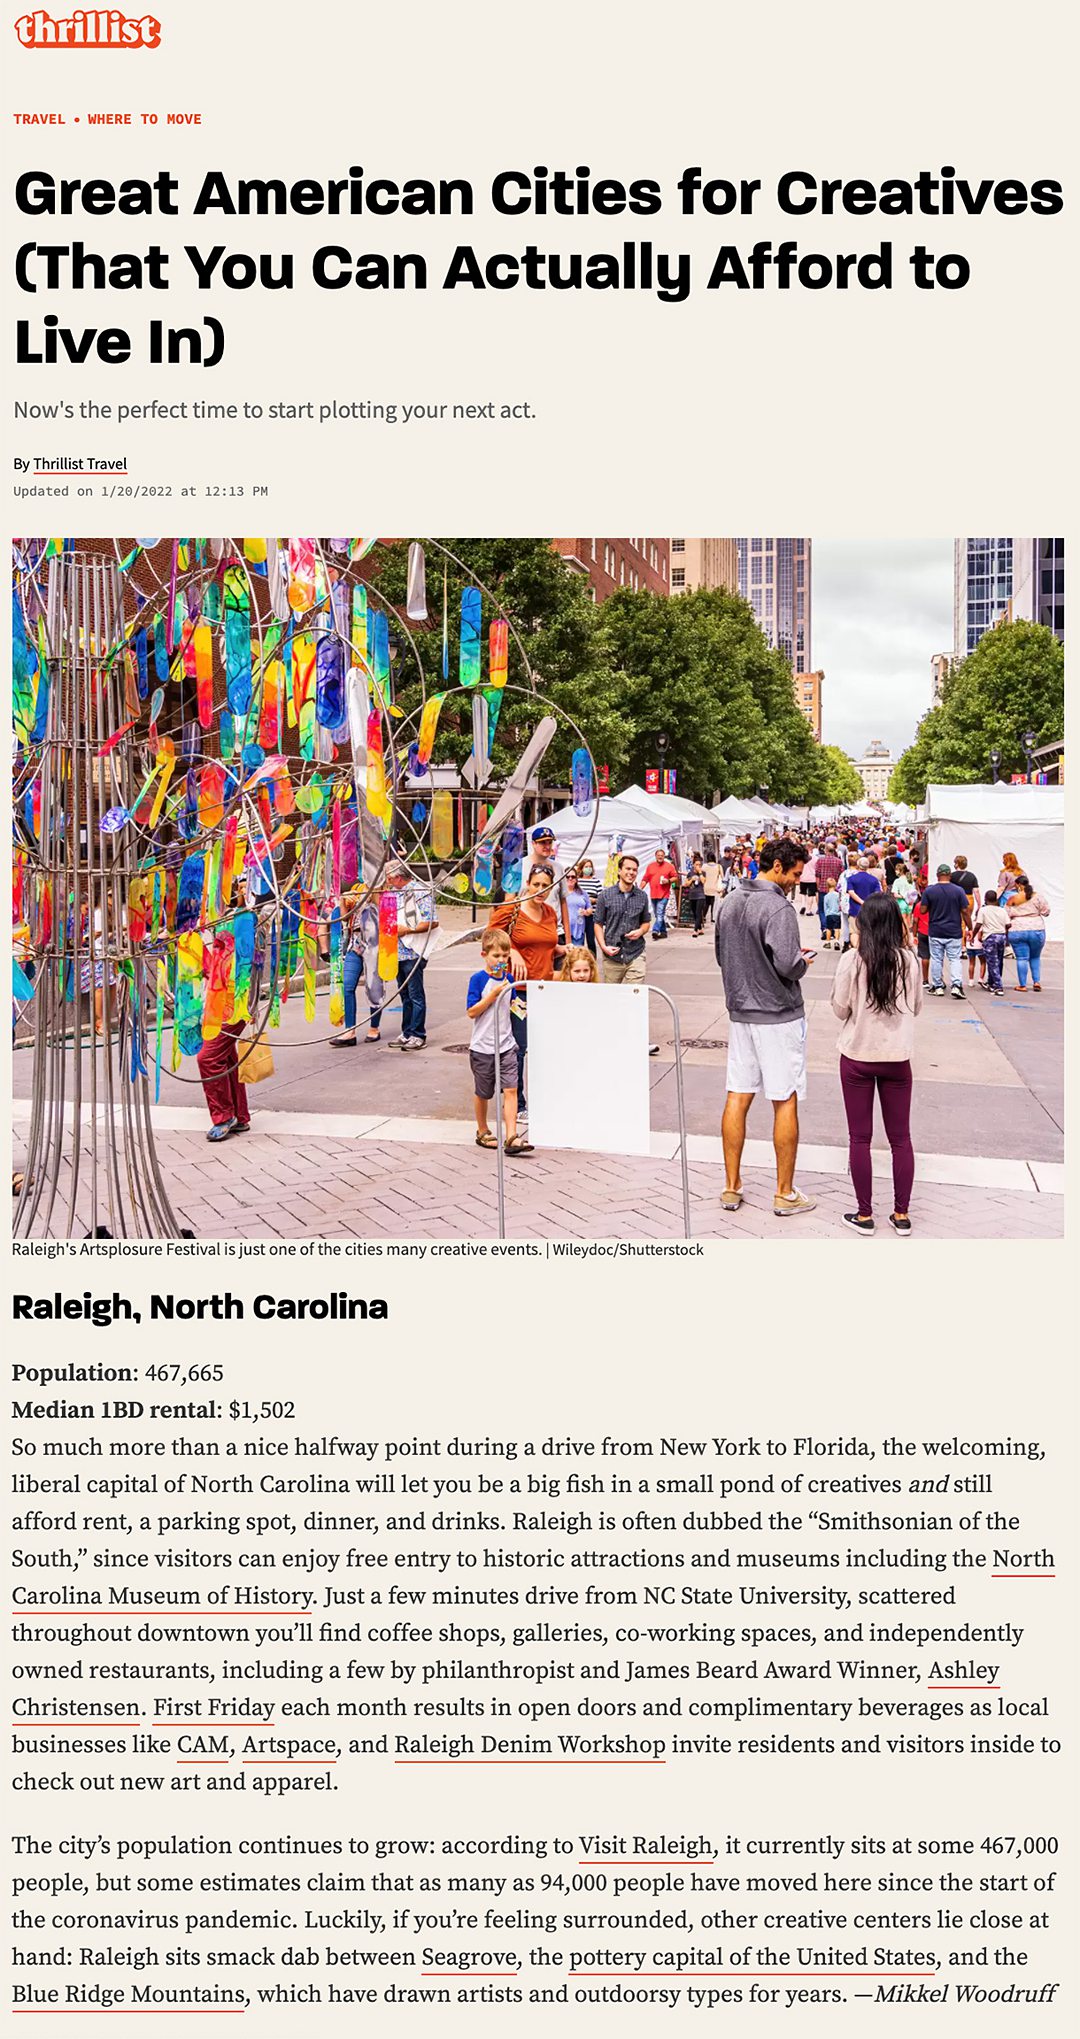 Thrillist article screen capture for the Best Cities for Creatives to live in.